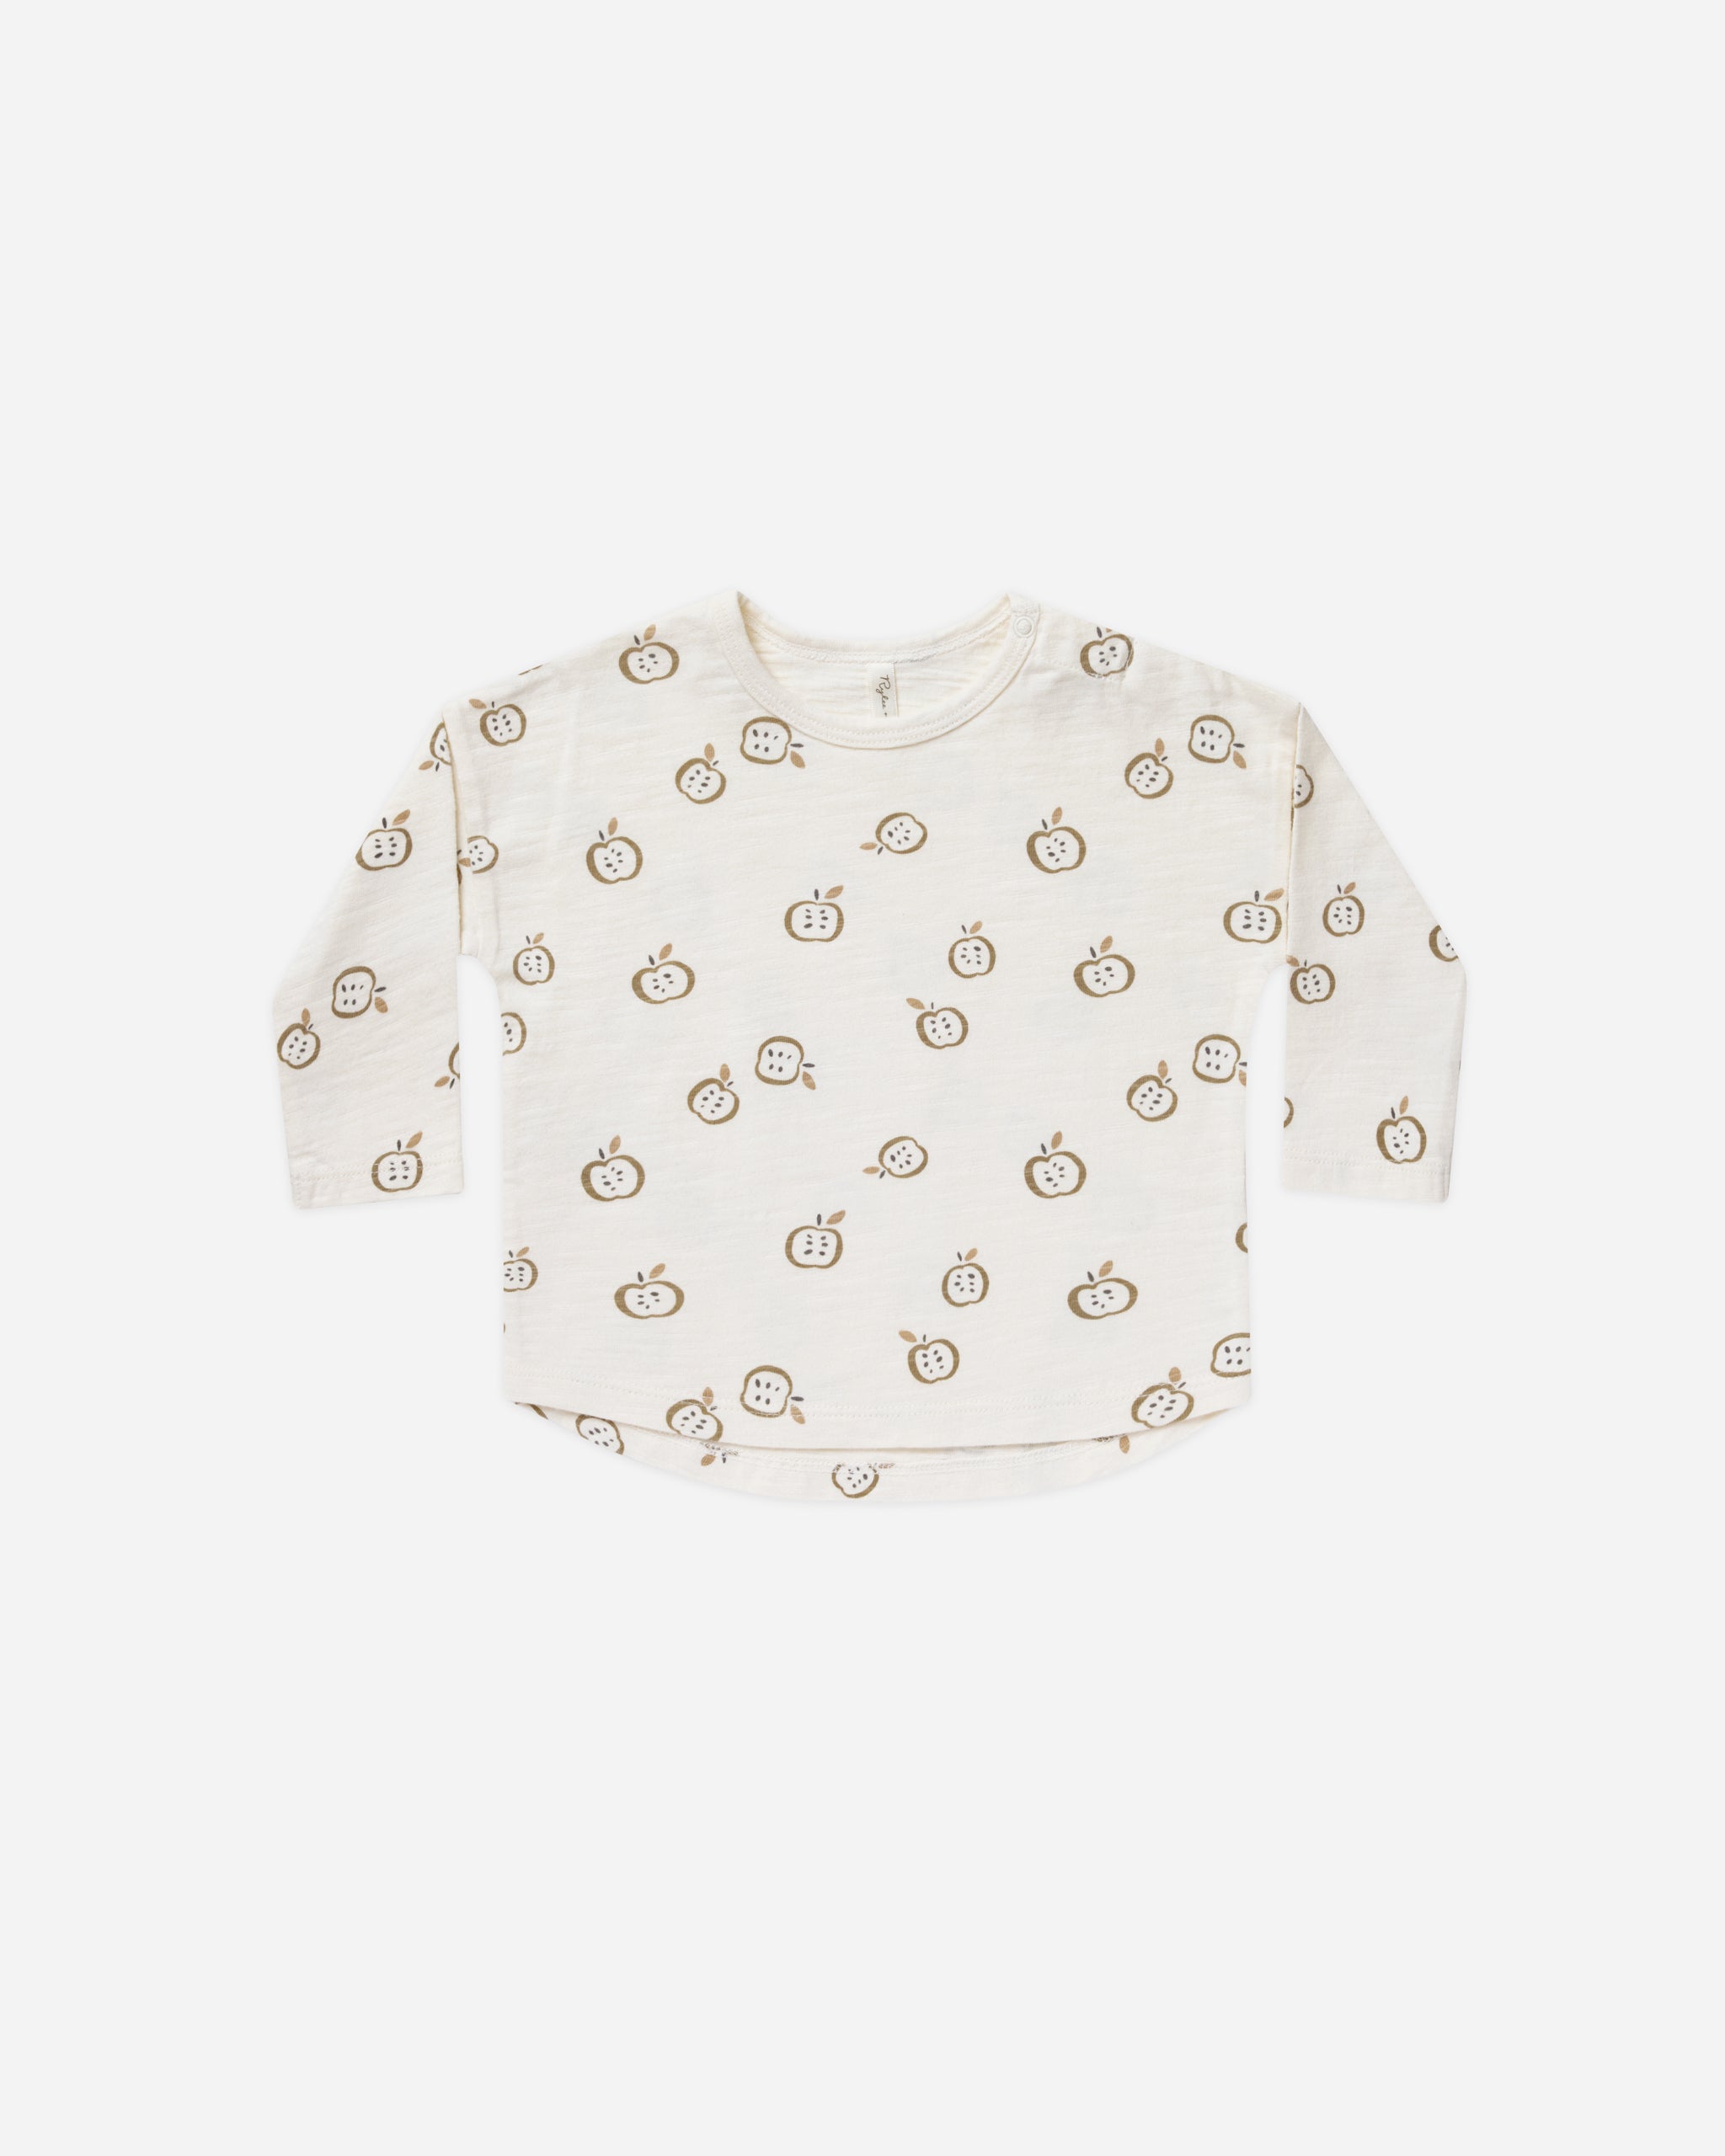 Long Sleeve Tee || Apples - Rylee + Cru | Kids Clothes | Trendy Baby Clothes | Modern Infant Outfits |